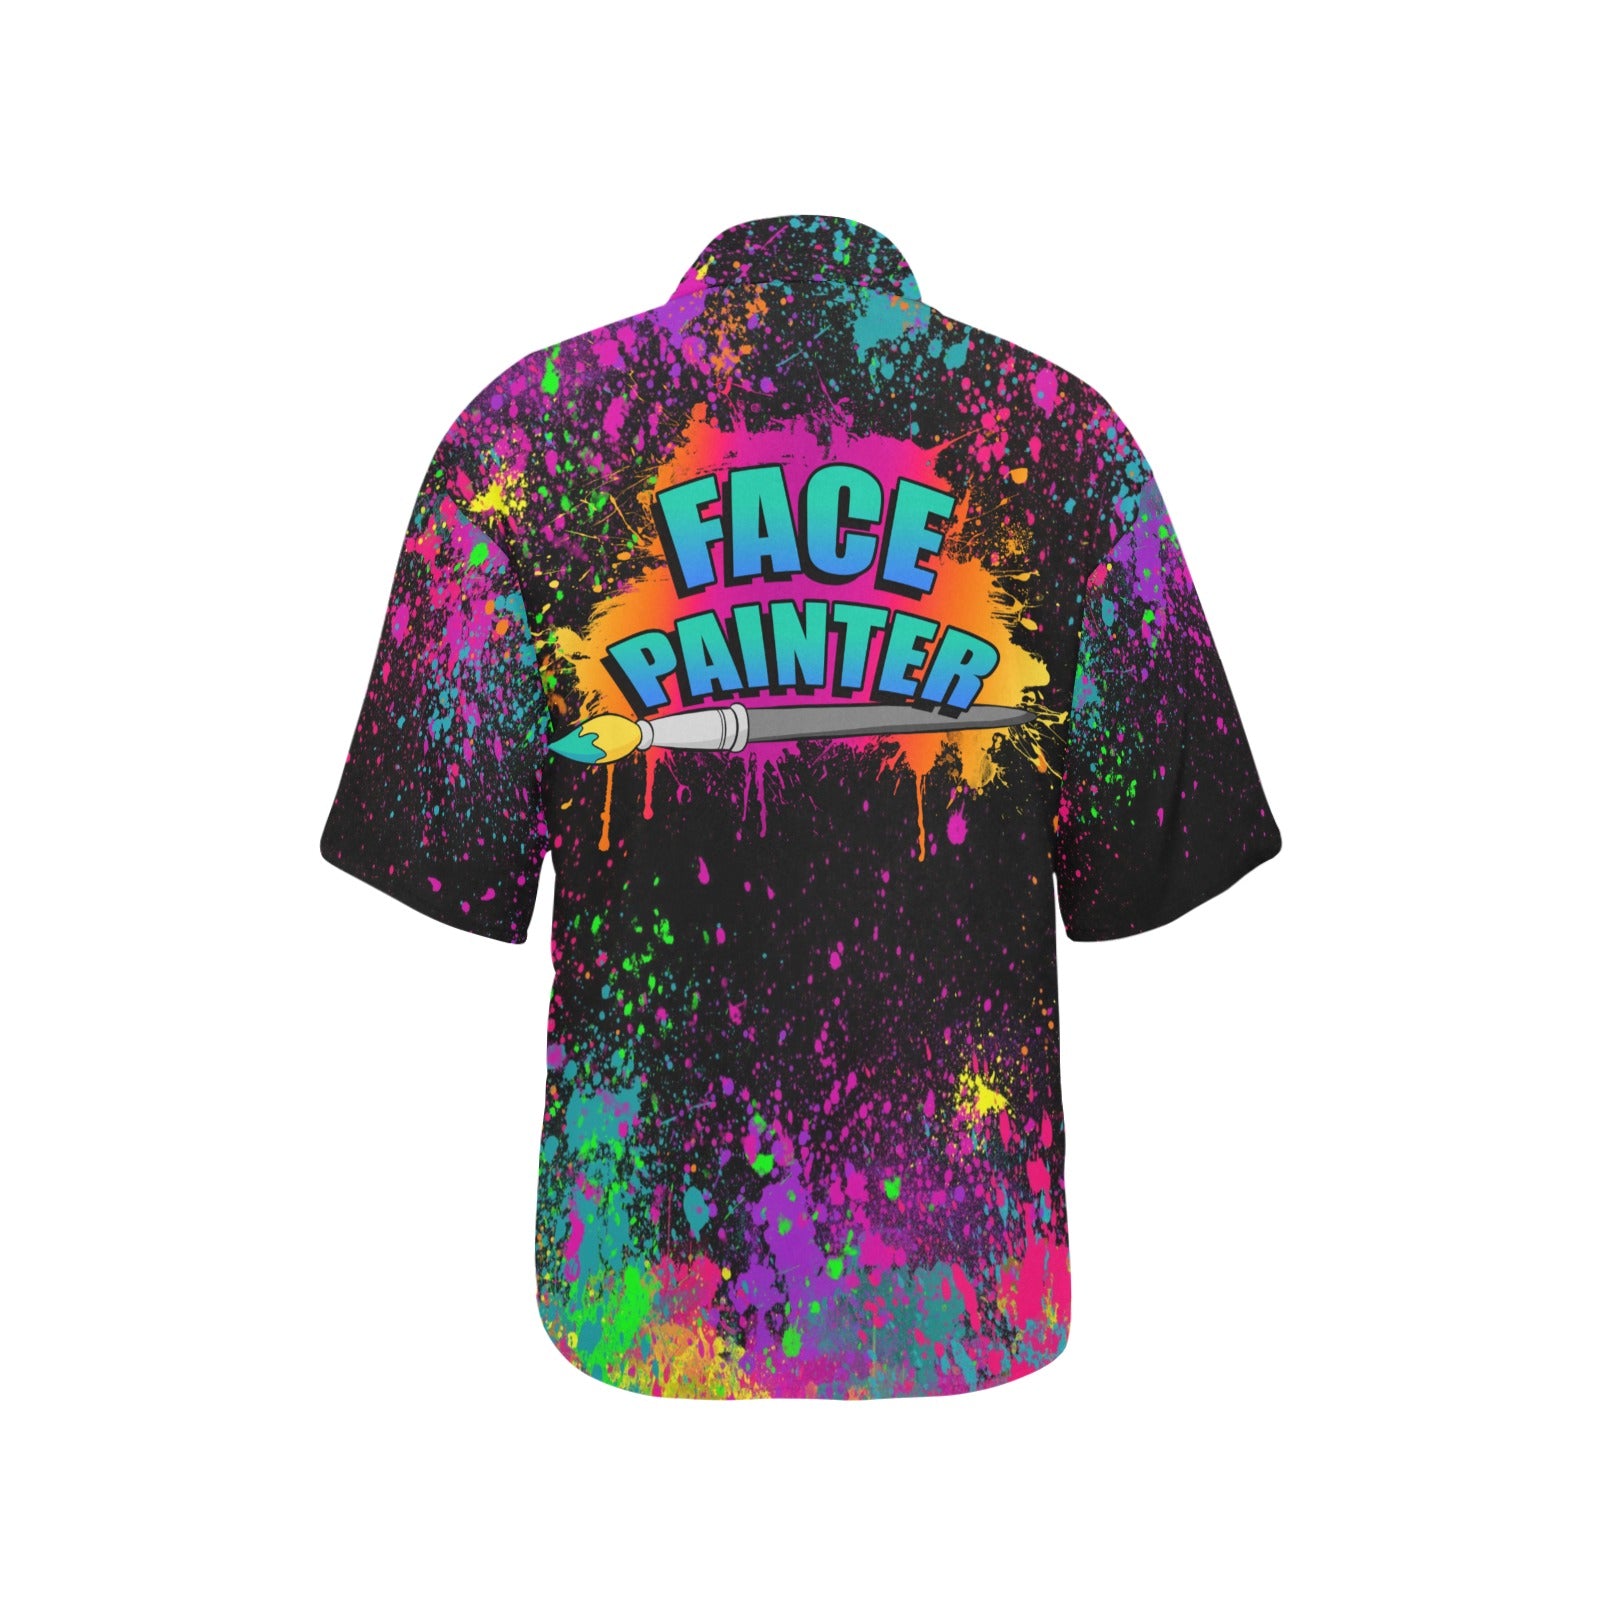 Black Hawaiian Shirt with paint splatter for professional Face painters